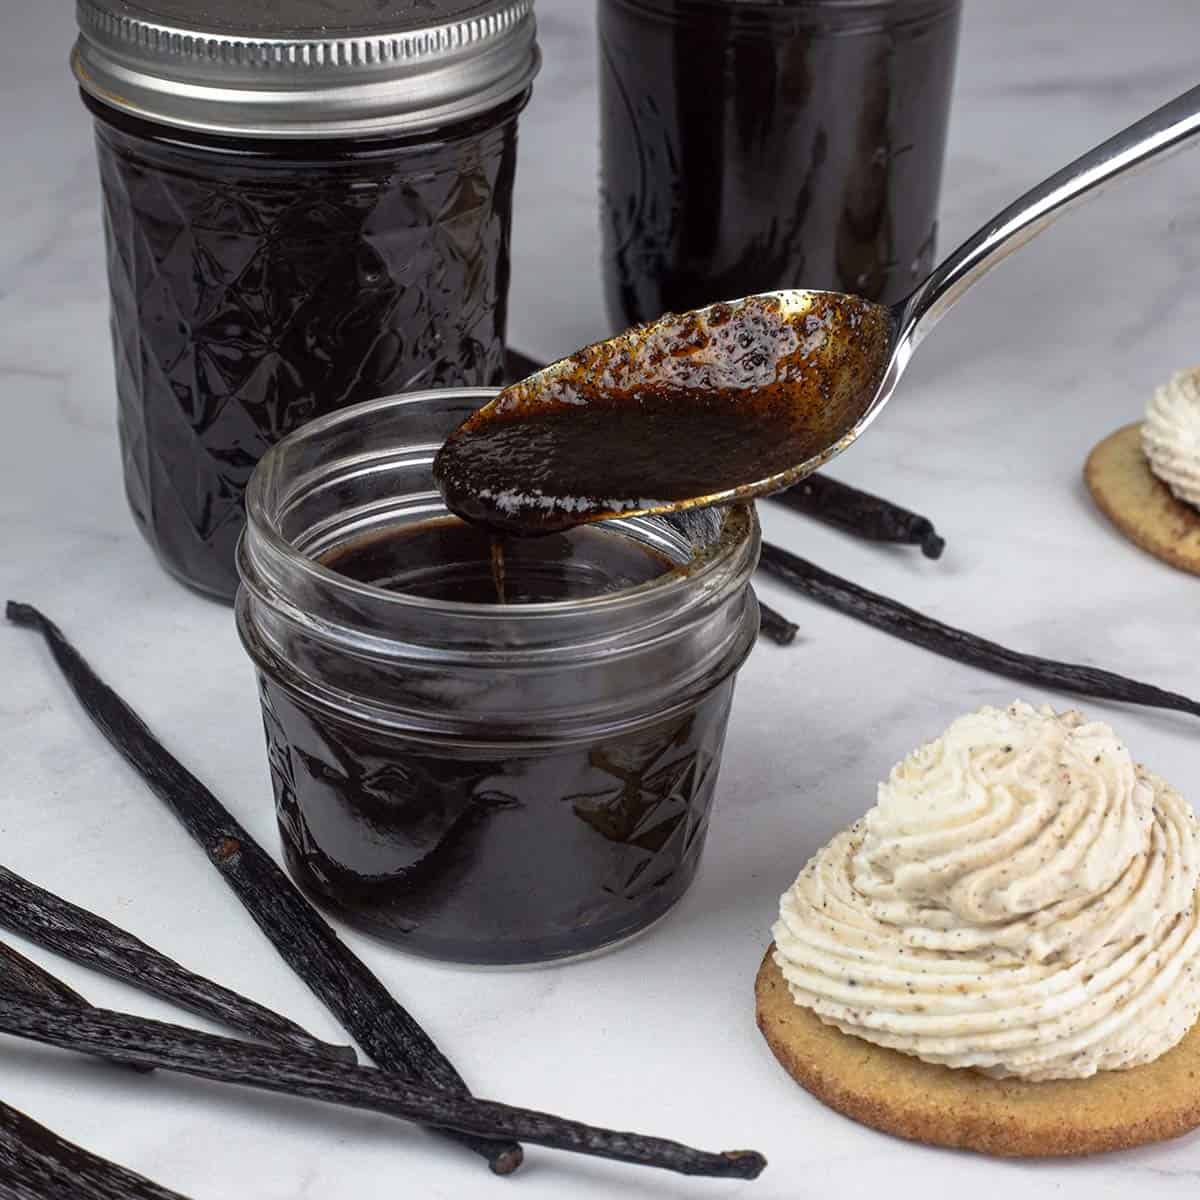 Homemade Vanilla Bean Paste in a small jar with spoon showing the thickness of it with a cookie topped with whipped cream made with vanilla paste beside it.